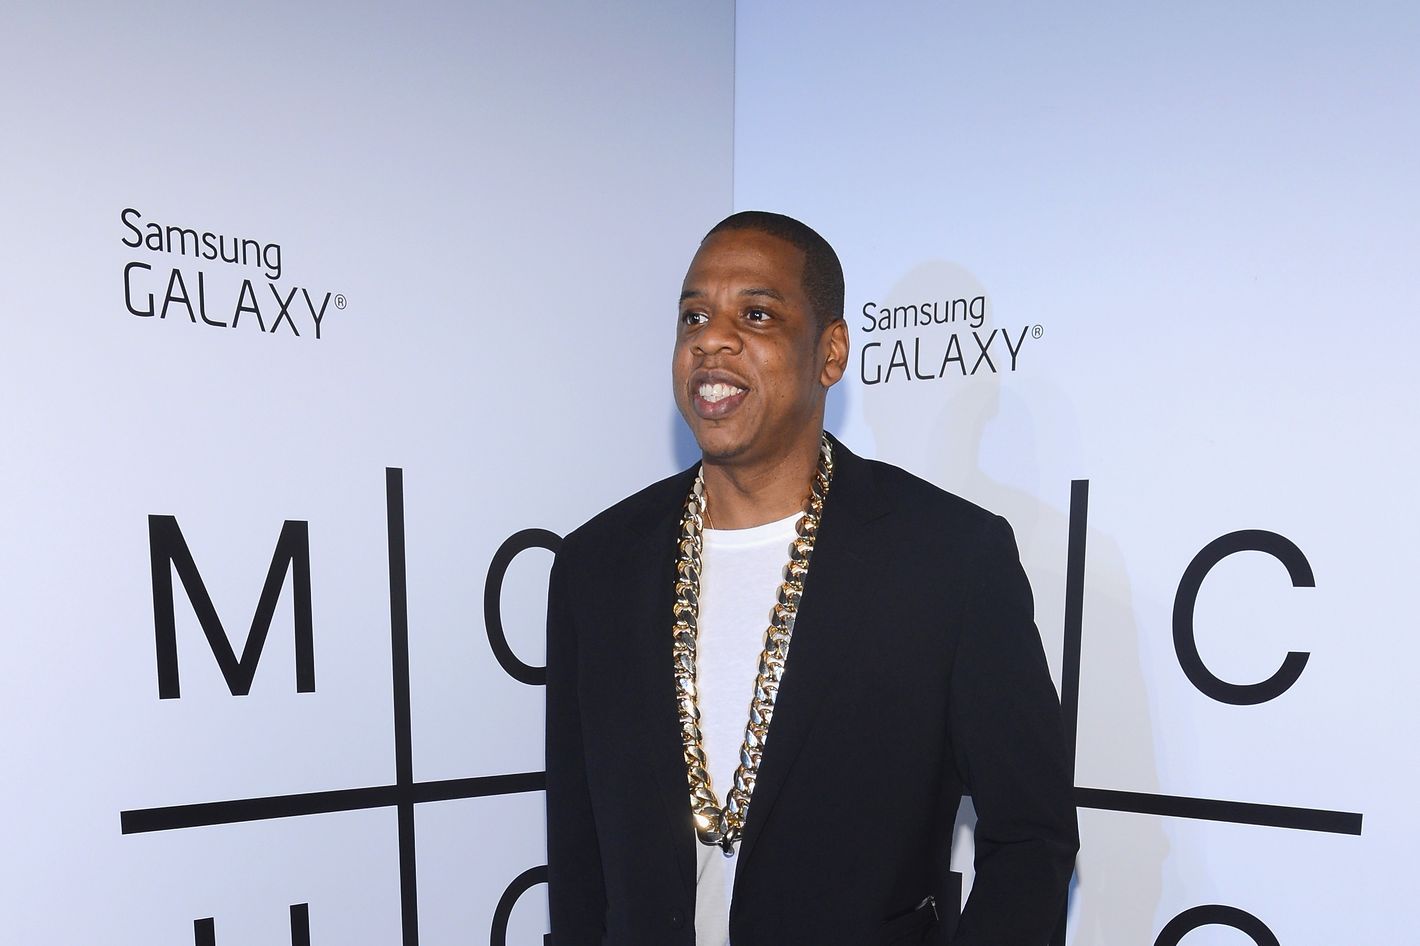 A Complete List of Every Product Jay-Z Has Endorsed